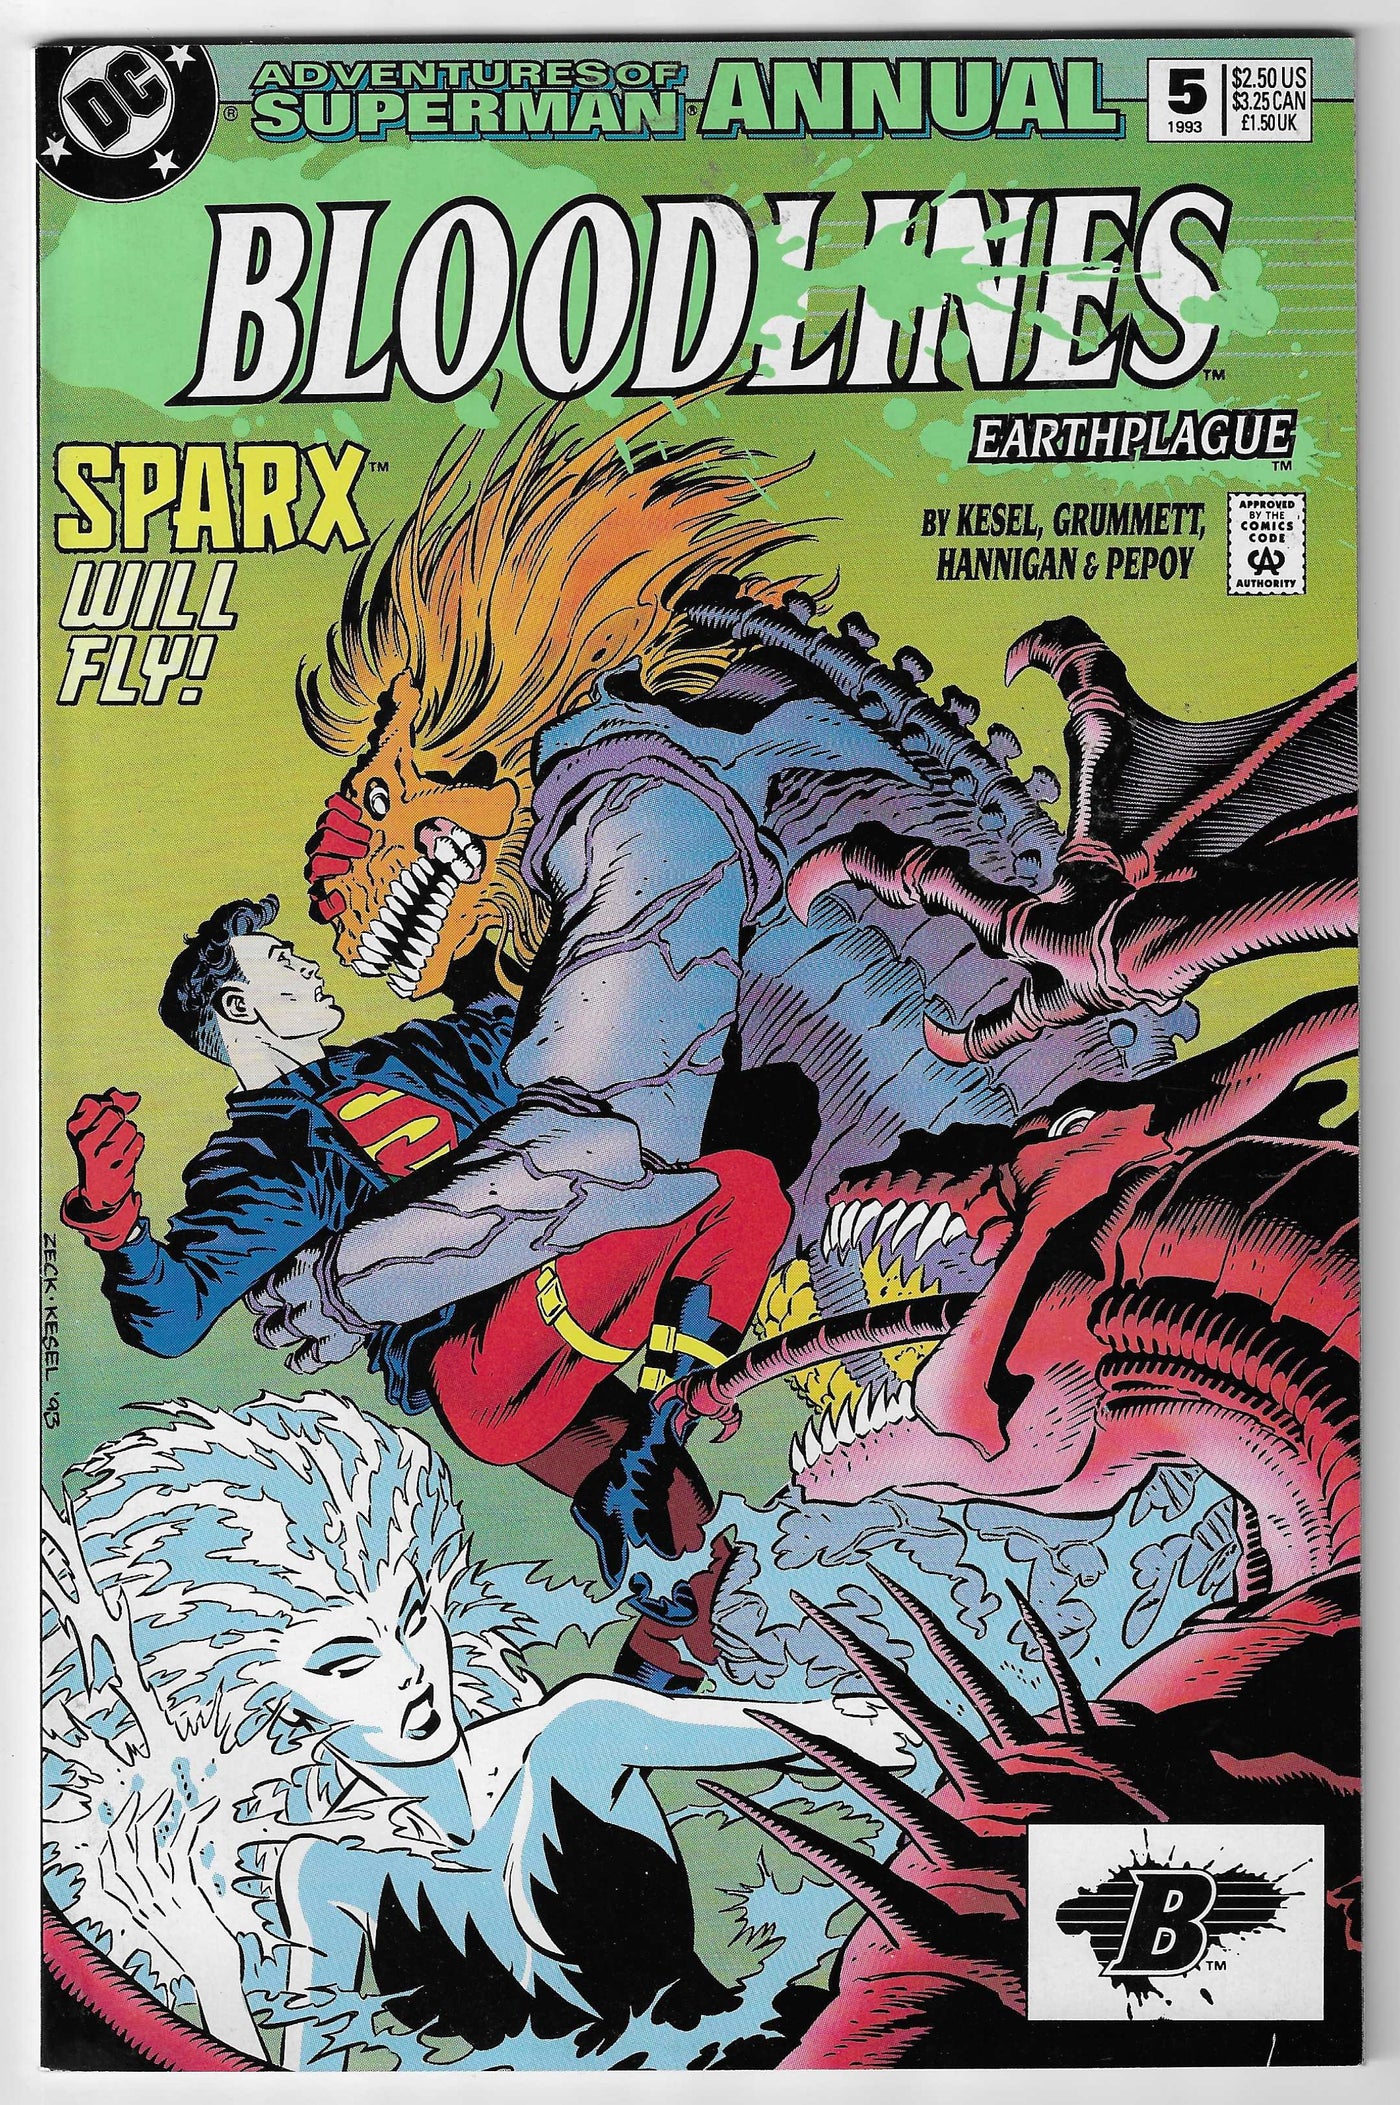 Adventures of Superman Annual: Bloodlines #5